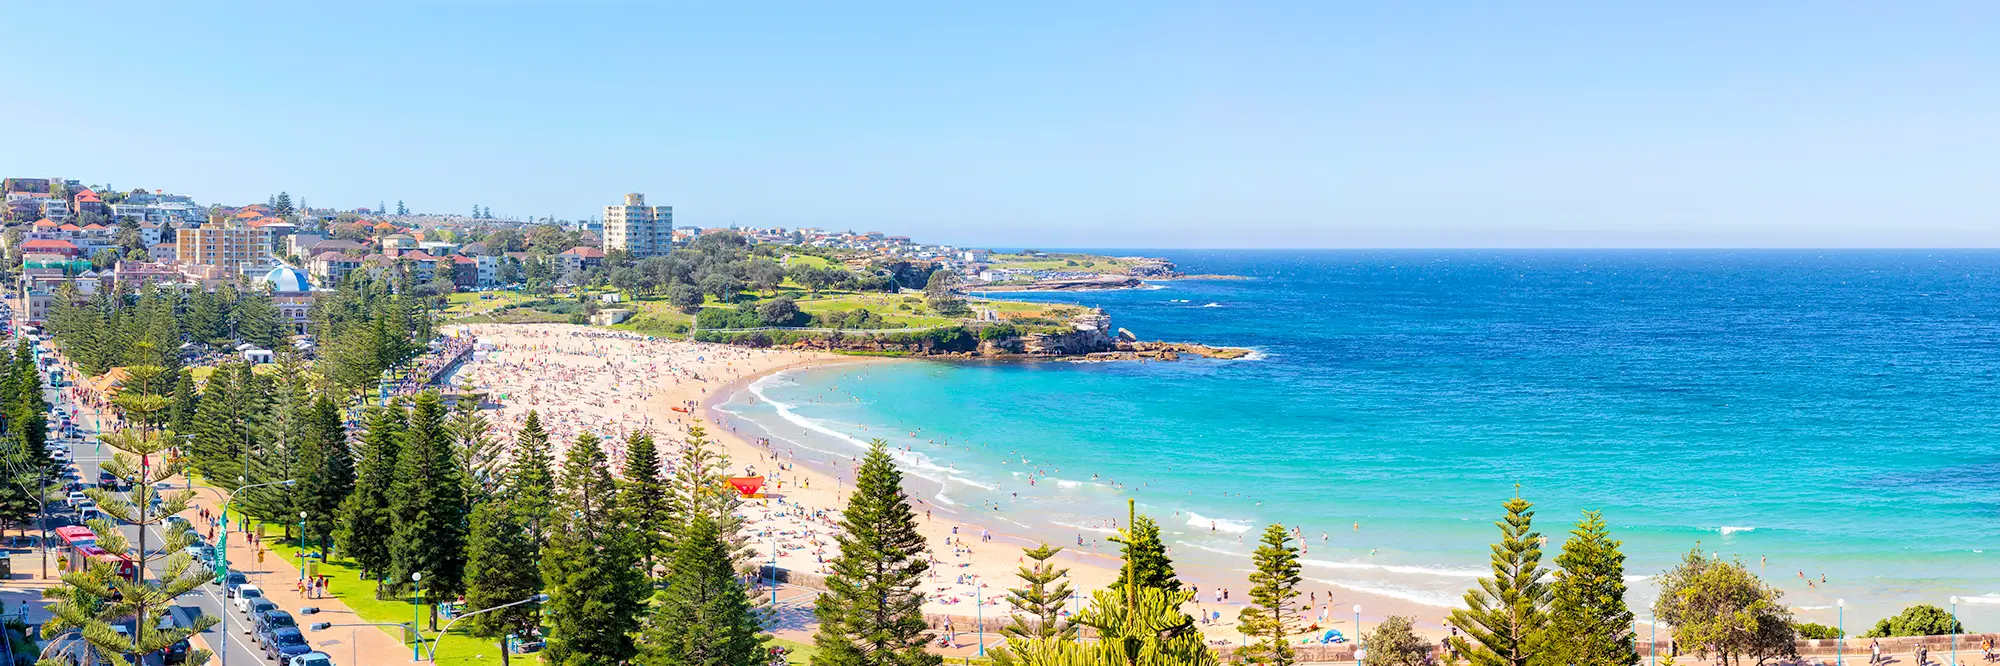 Coogee Beach Daytime Panoramic Landscape Framed Photos